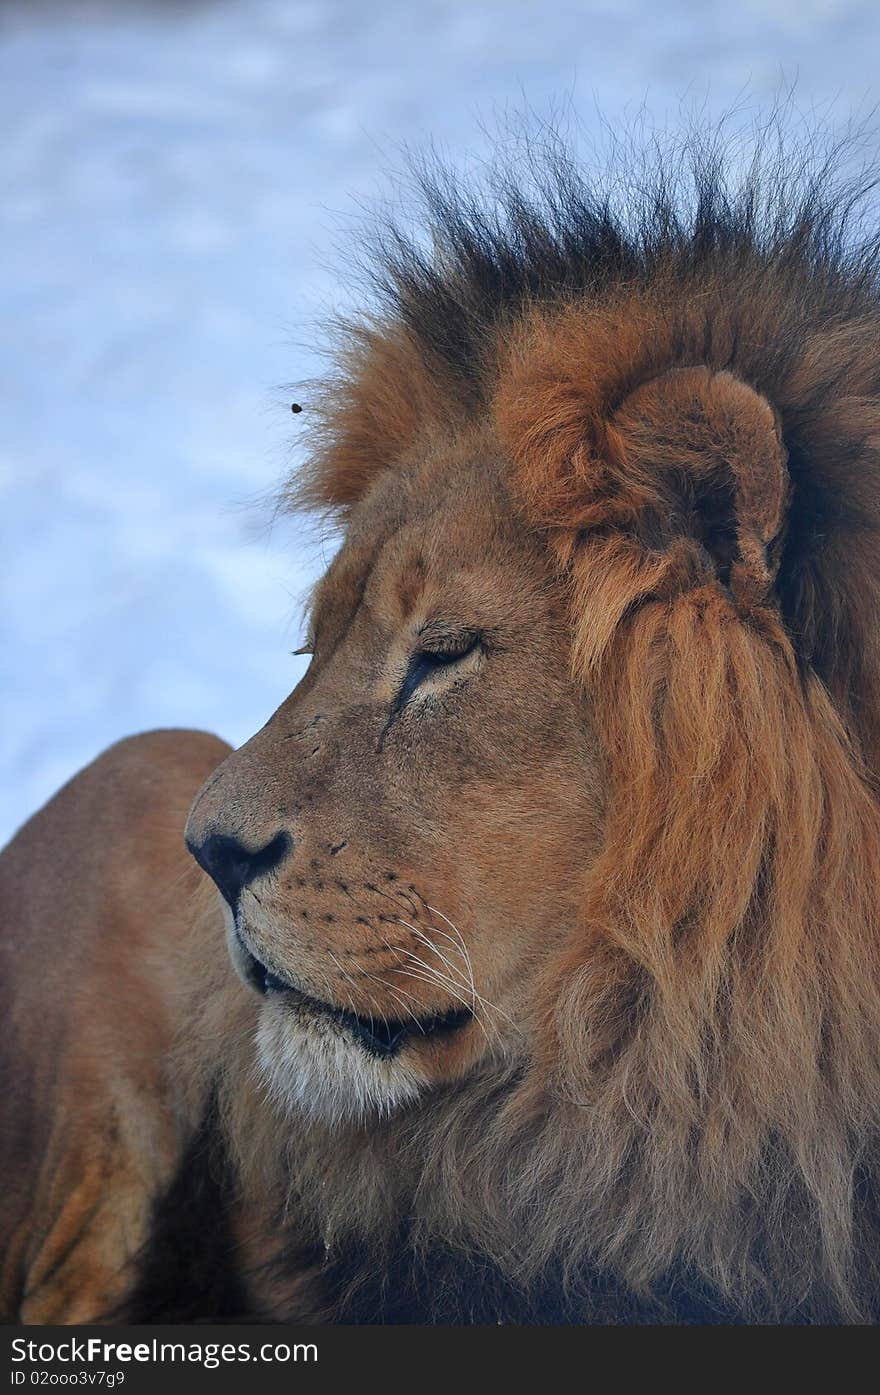 Profile of a lion at the Calgary Zoo